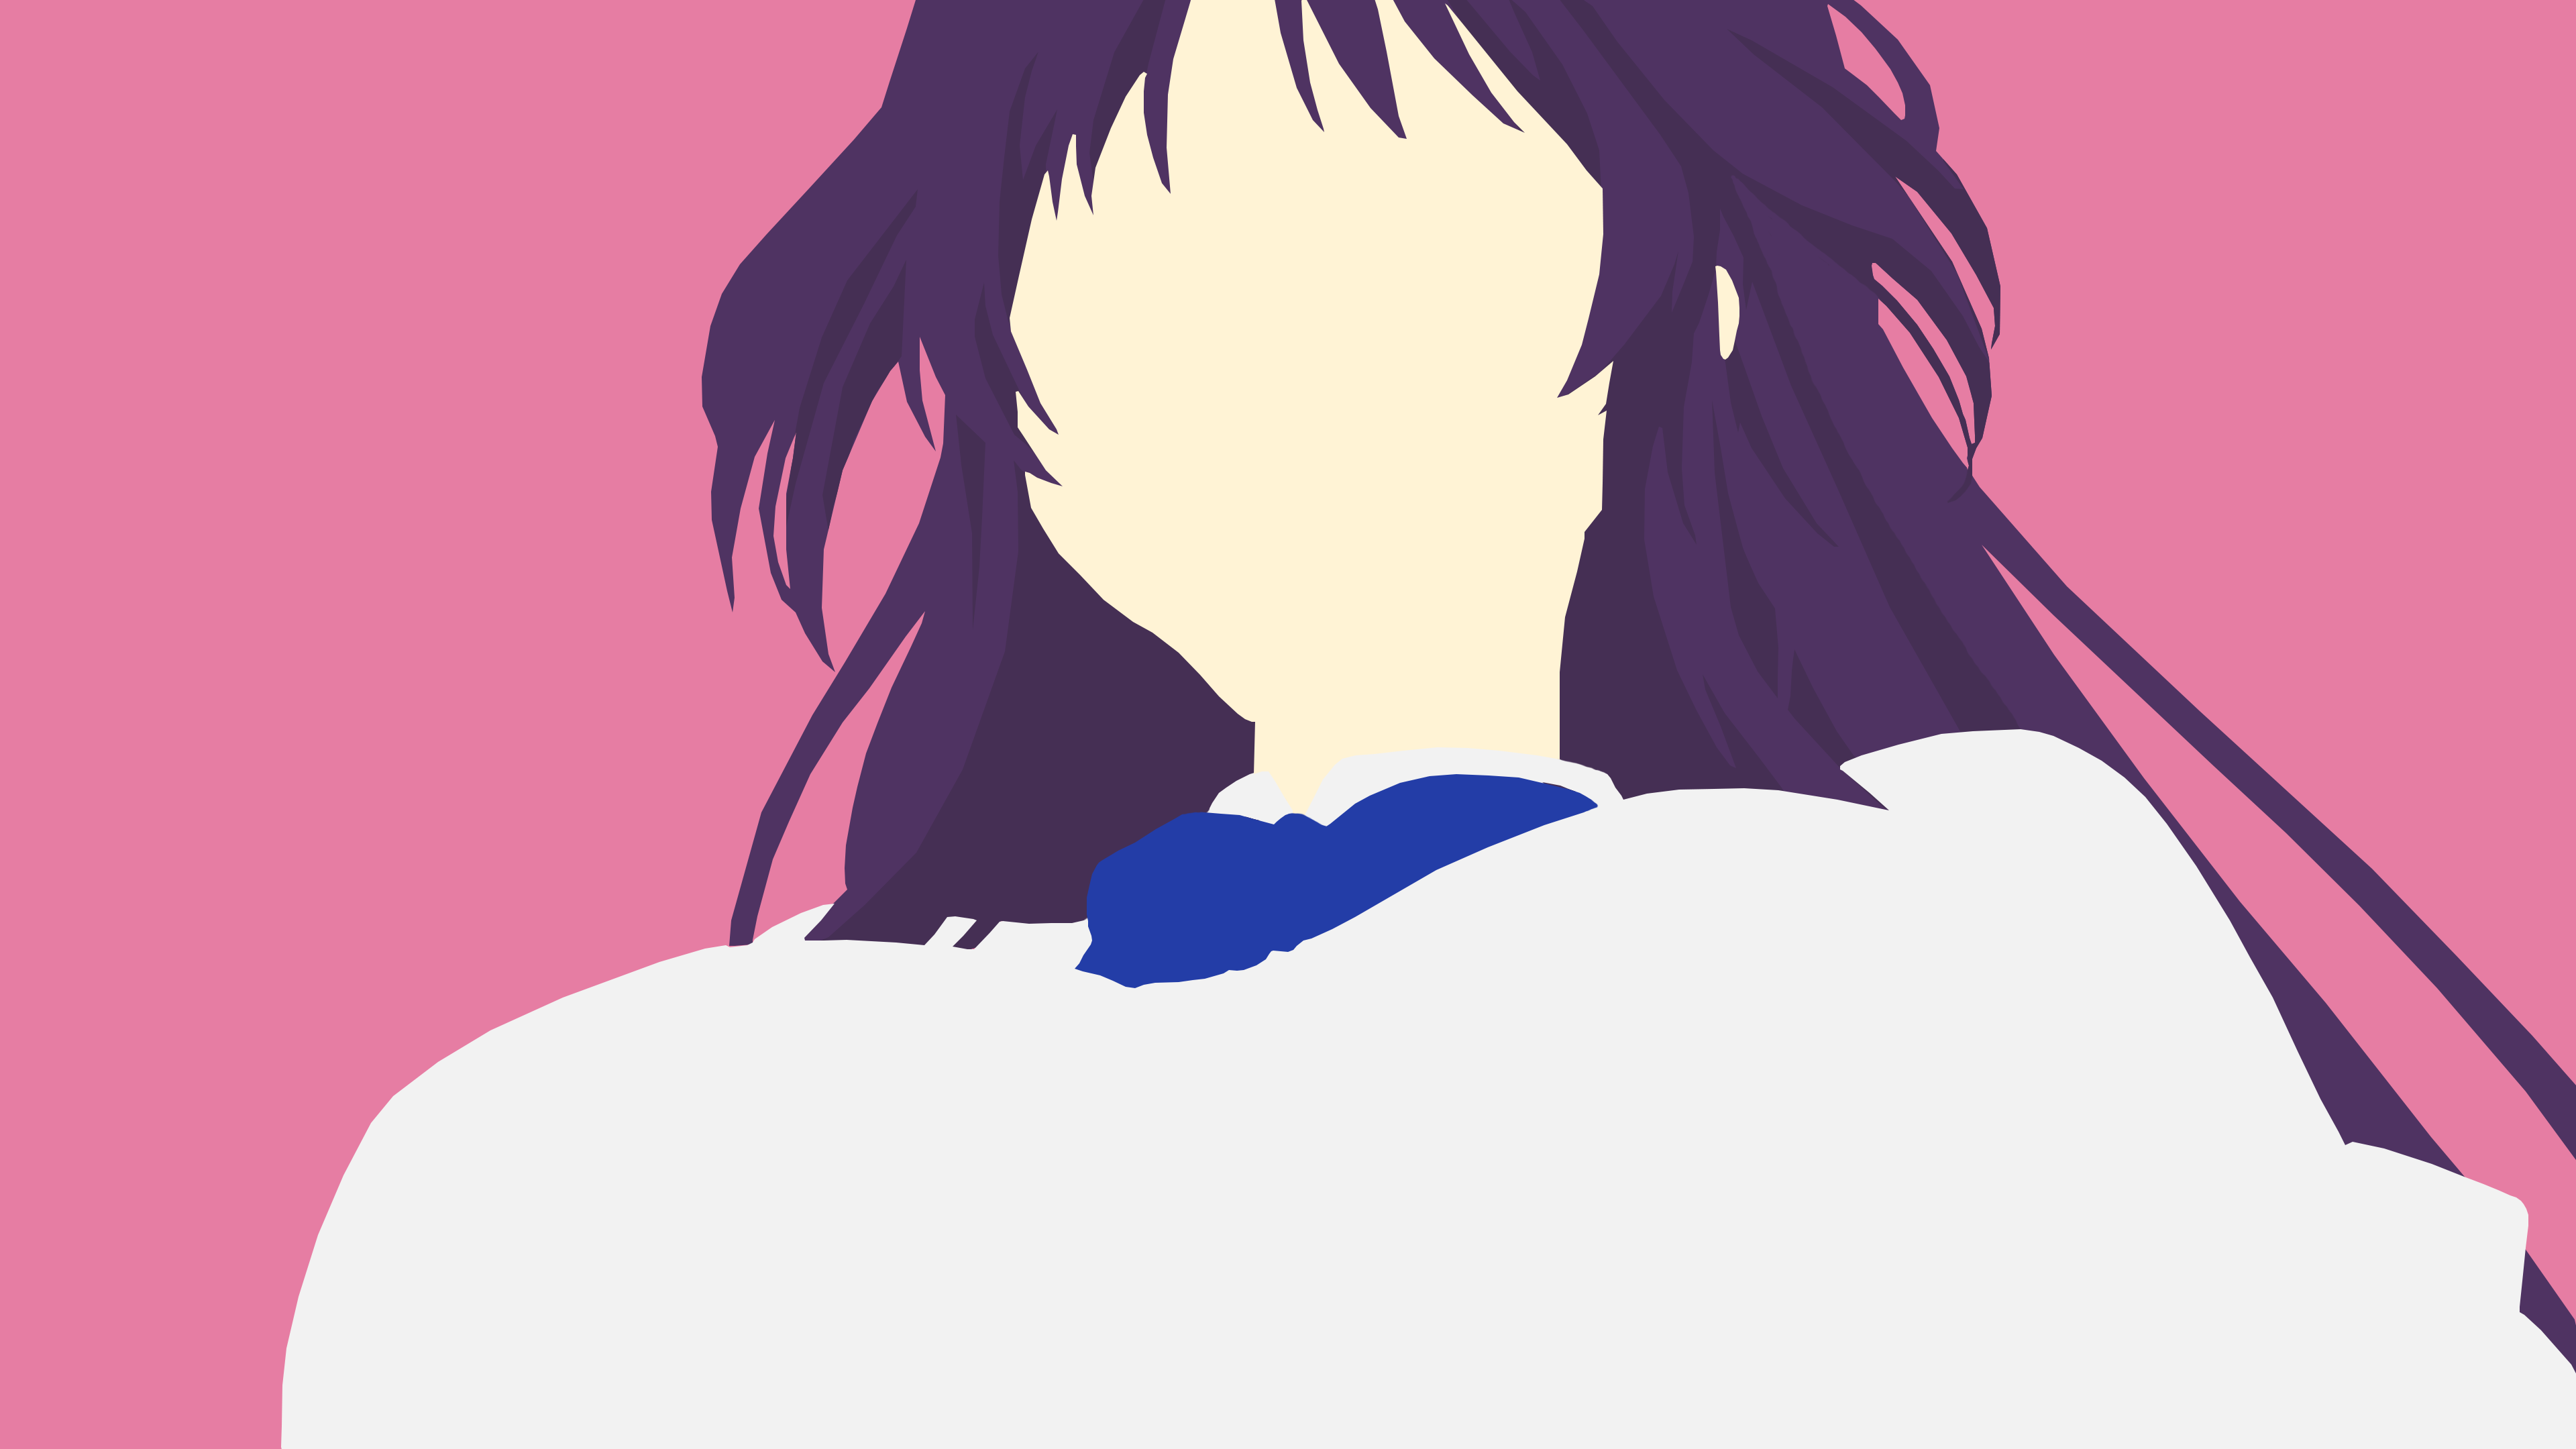 Kyou Goshouin And You Thought There Is Never A Girl Online Minimalist 3840x2160